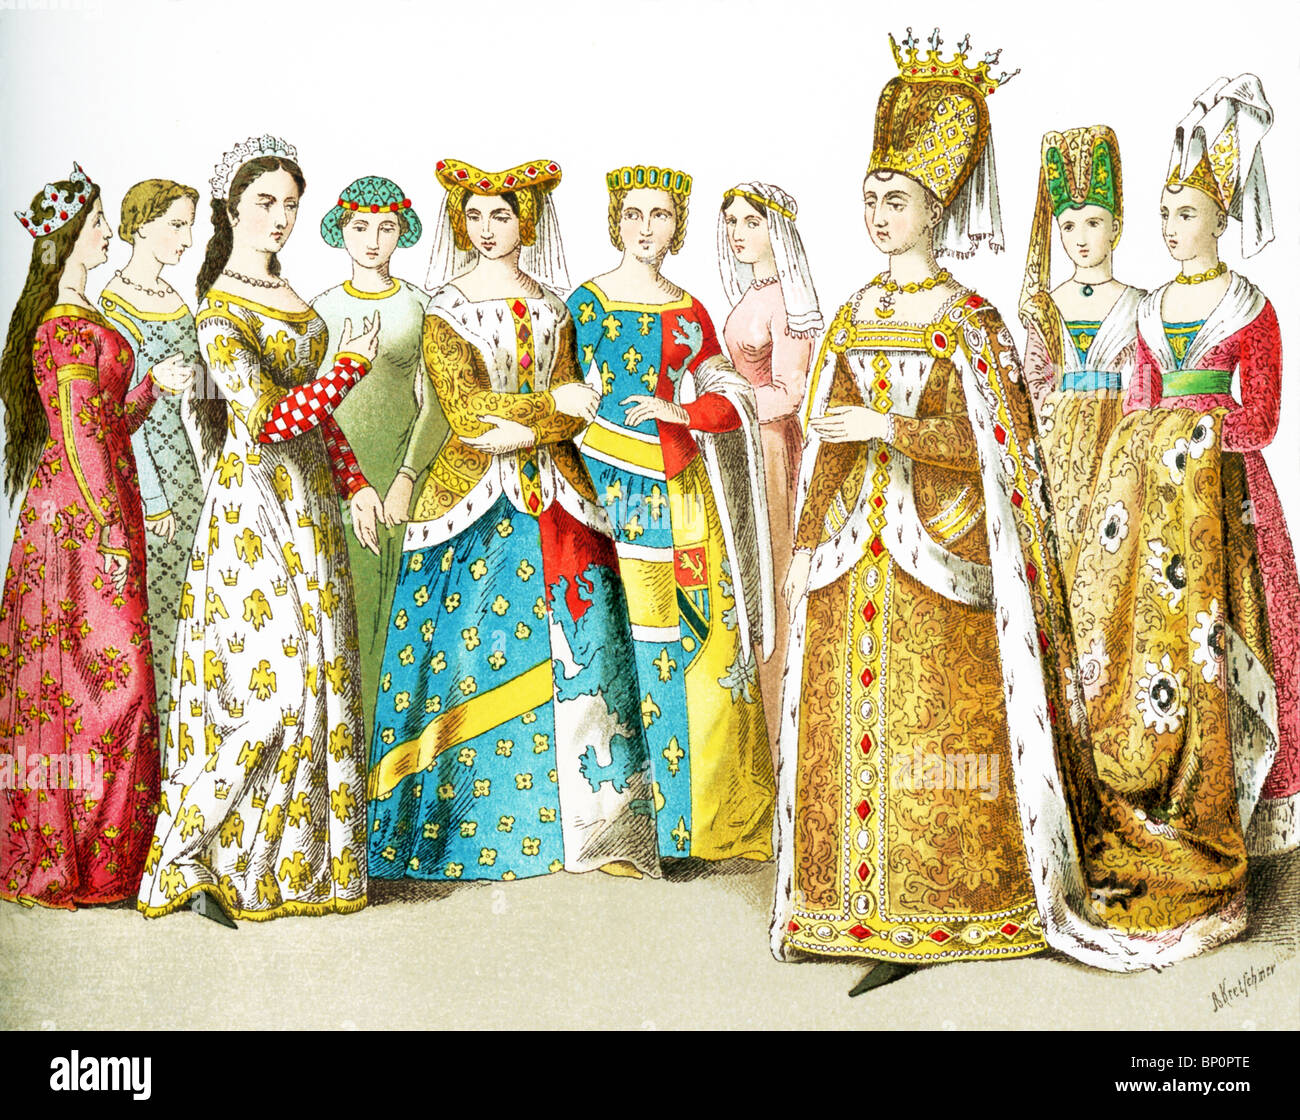 French women around 1100: queen, four ladies of rank, princess, lady of rank, Isabel of Bavaria, two ladies in waiting. Stock Photo